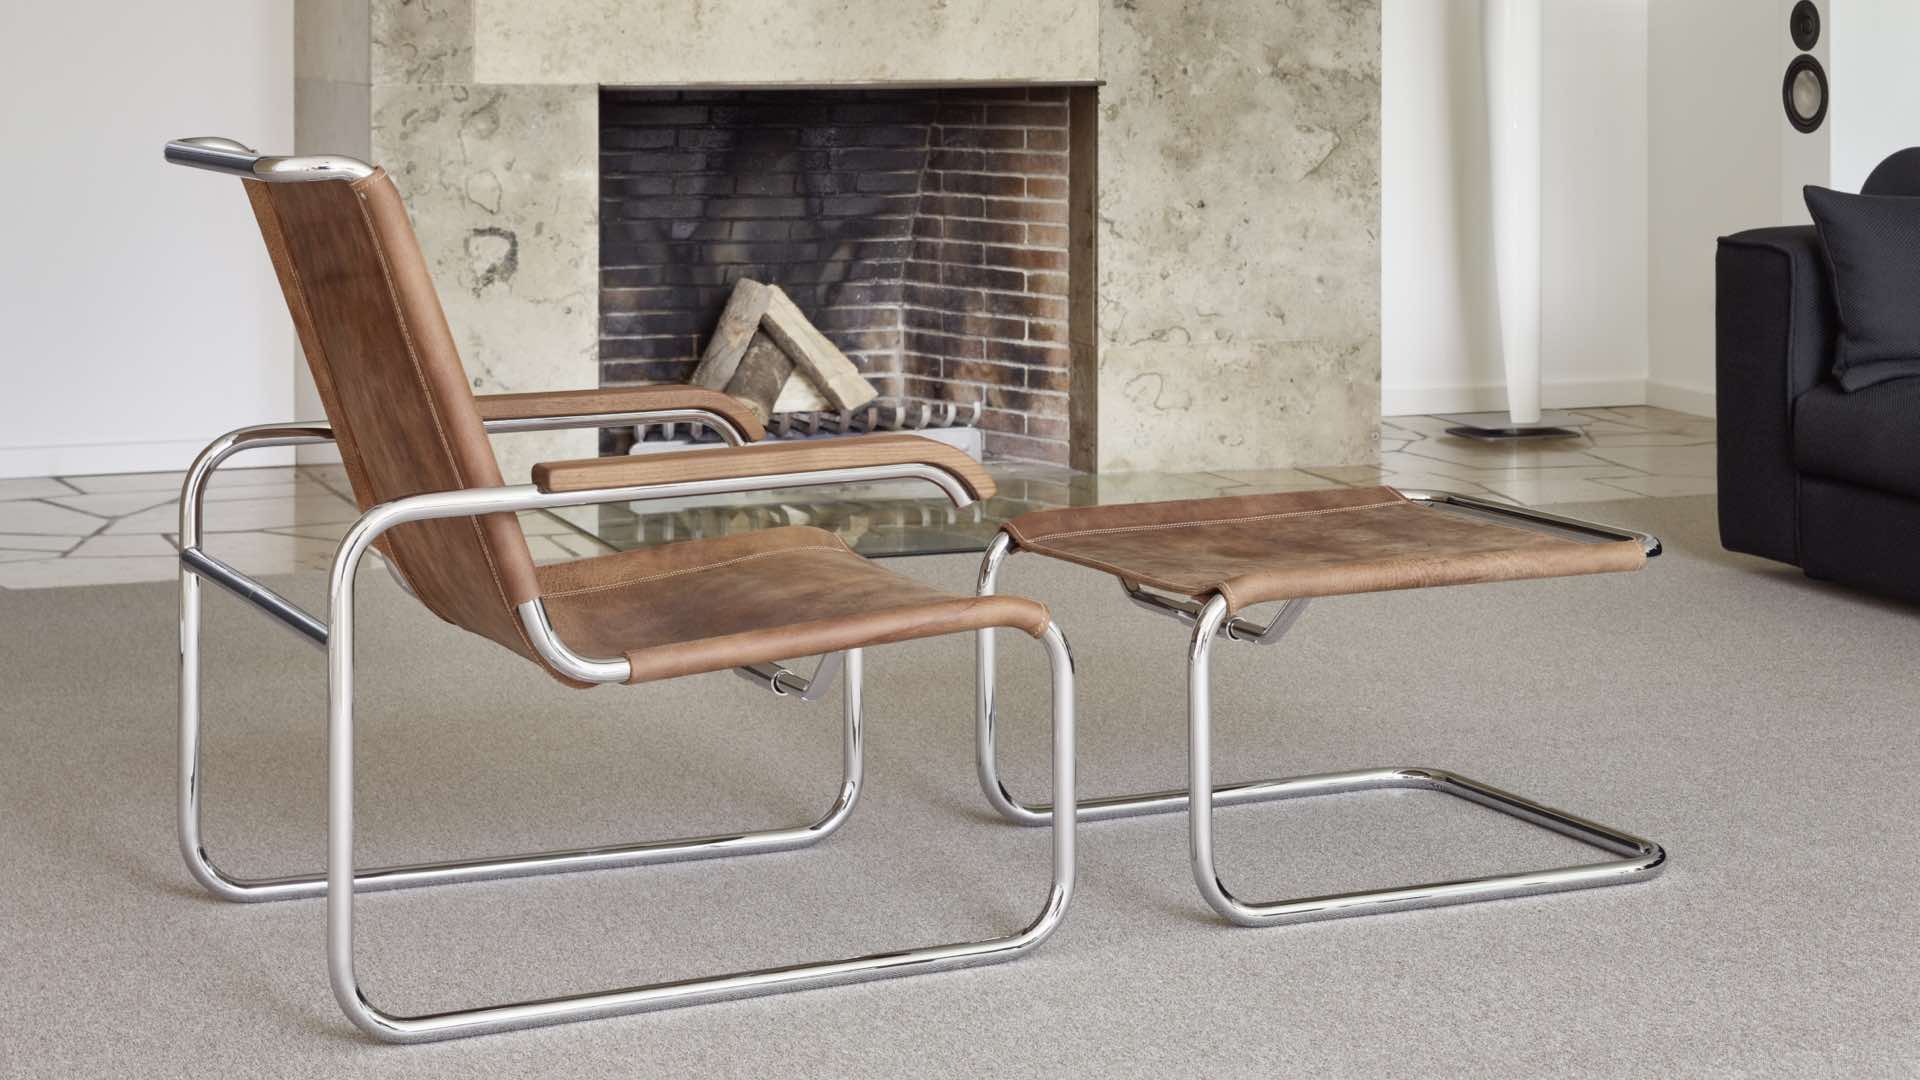 thonet-s35-pure-materials-ambiente(1)